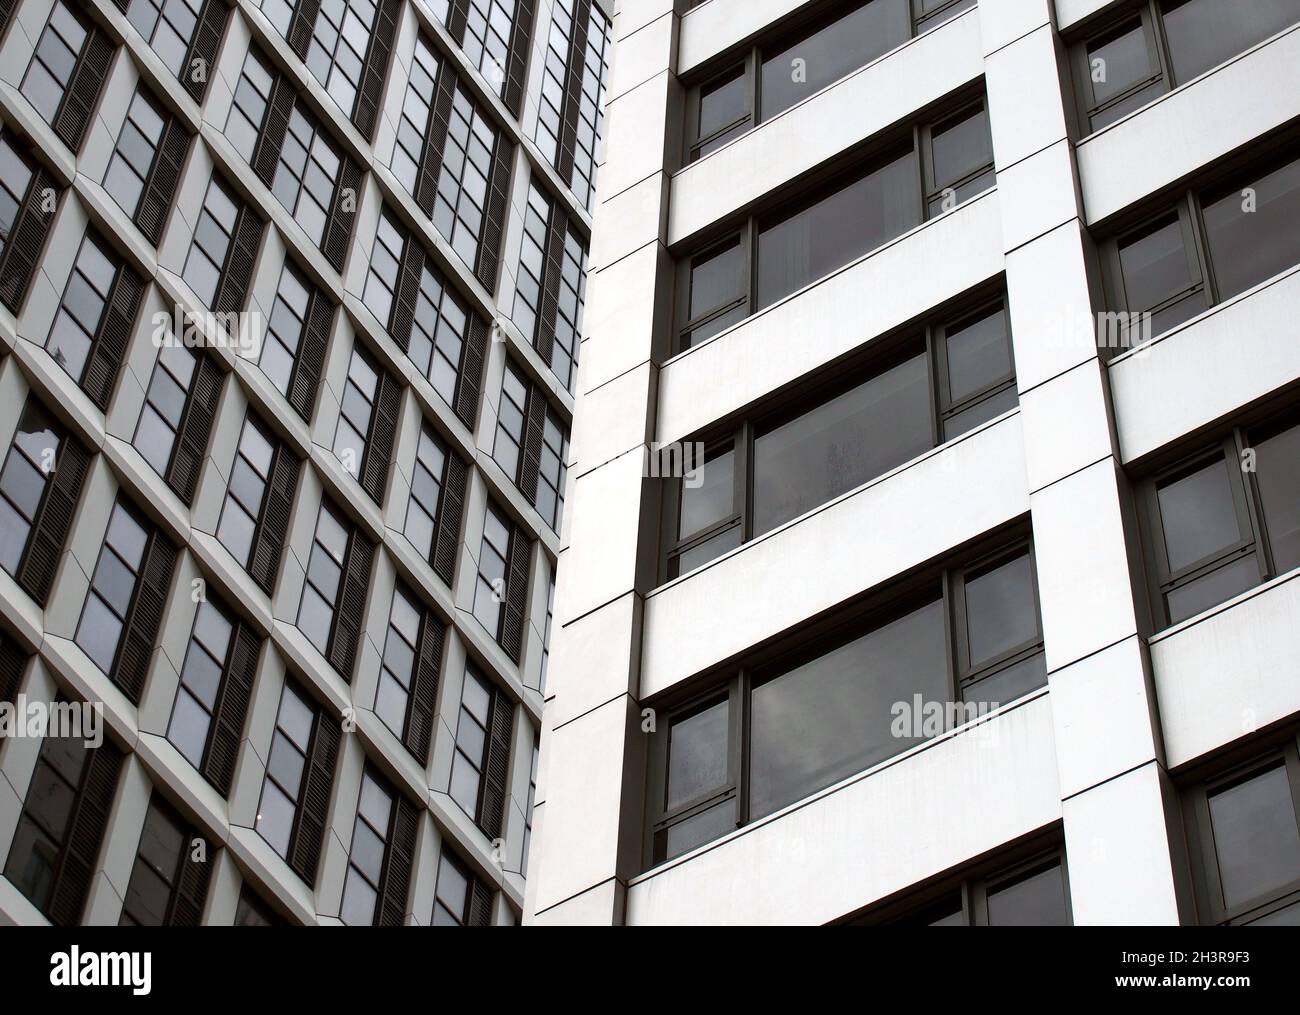 Close up detail of tall high rose modern apartment buildings with white cladding and dark windows Stock Photo